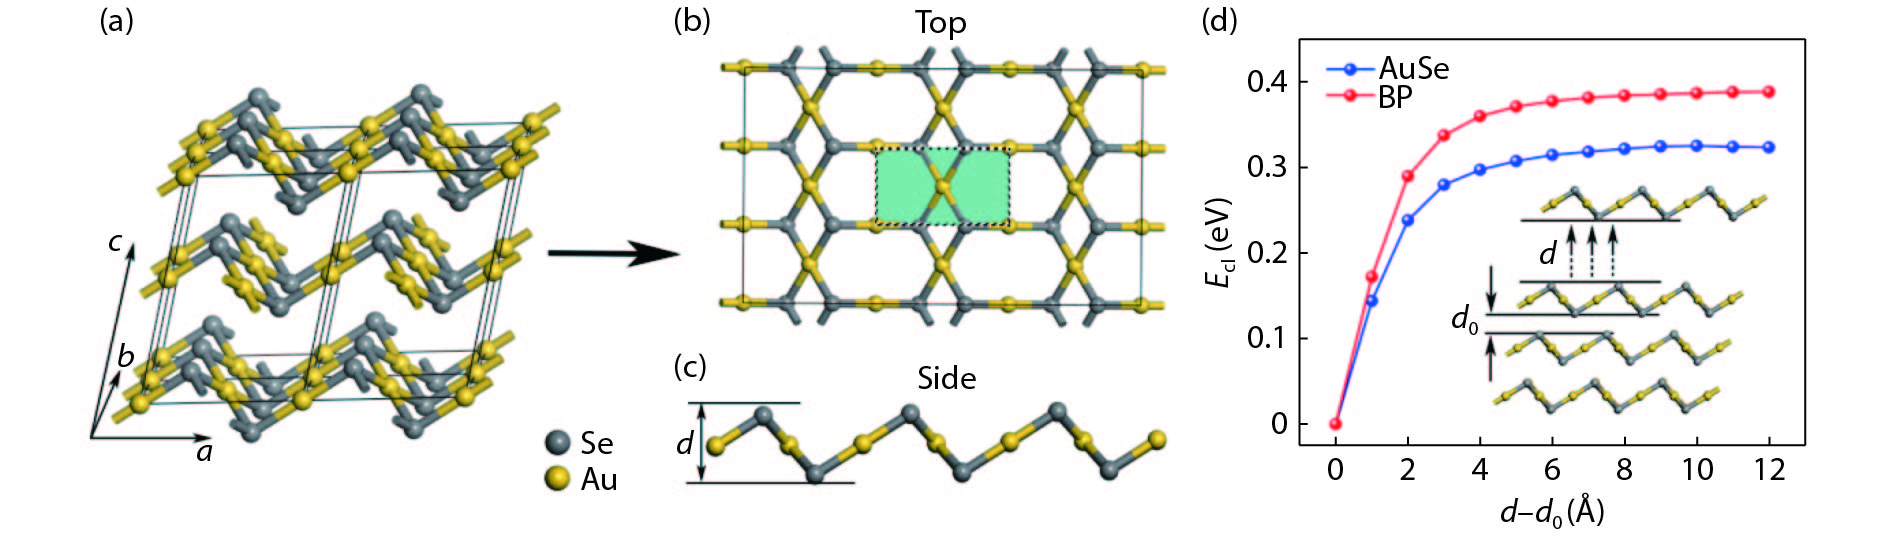 (Color online) Structure of (a) bulk AuSe with 2 × 2 × 1 supercell, (b) two dimensional AuSe in top view and (c) side view. (d) Cleavage energy of AuSe monolayer and black phorphous.